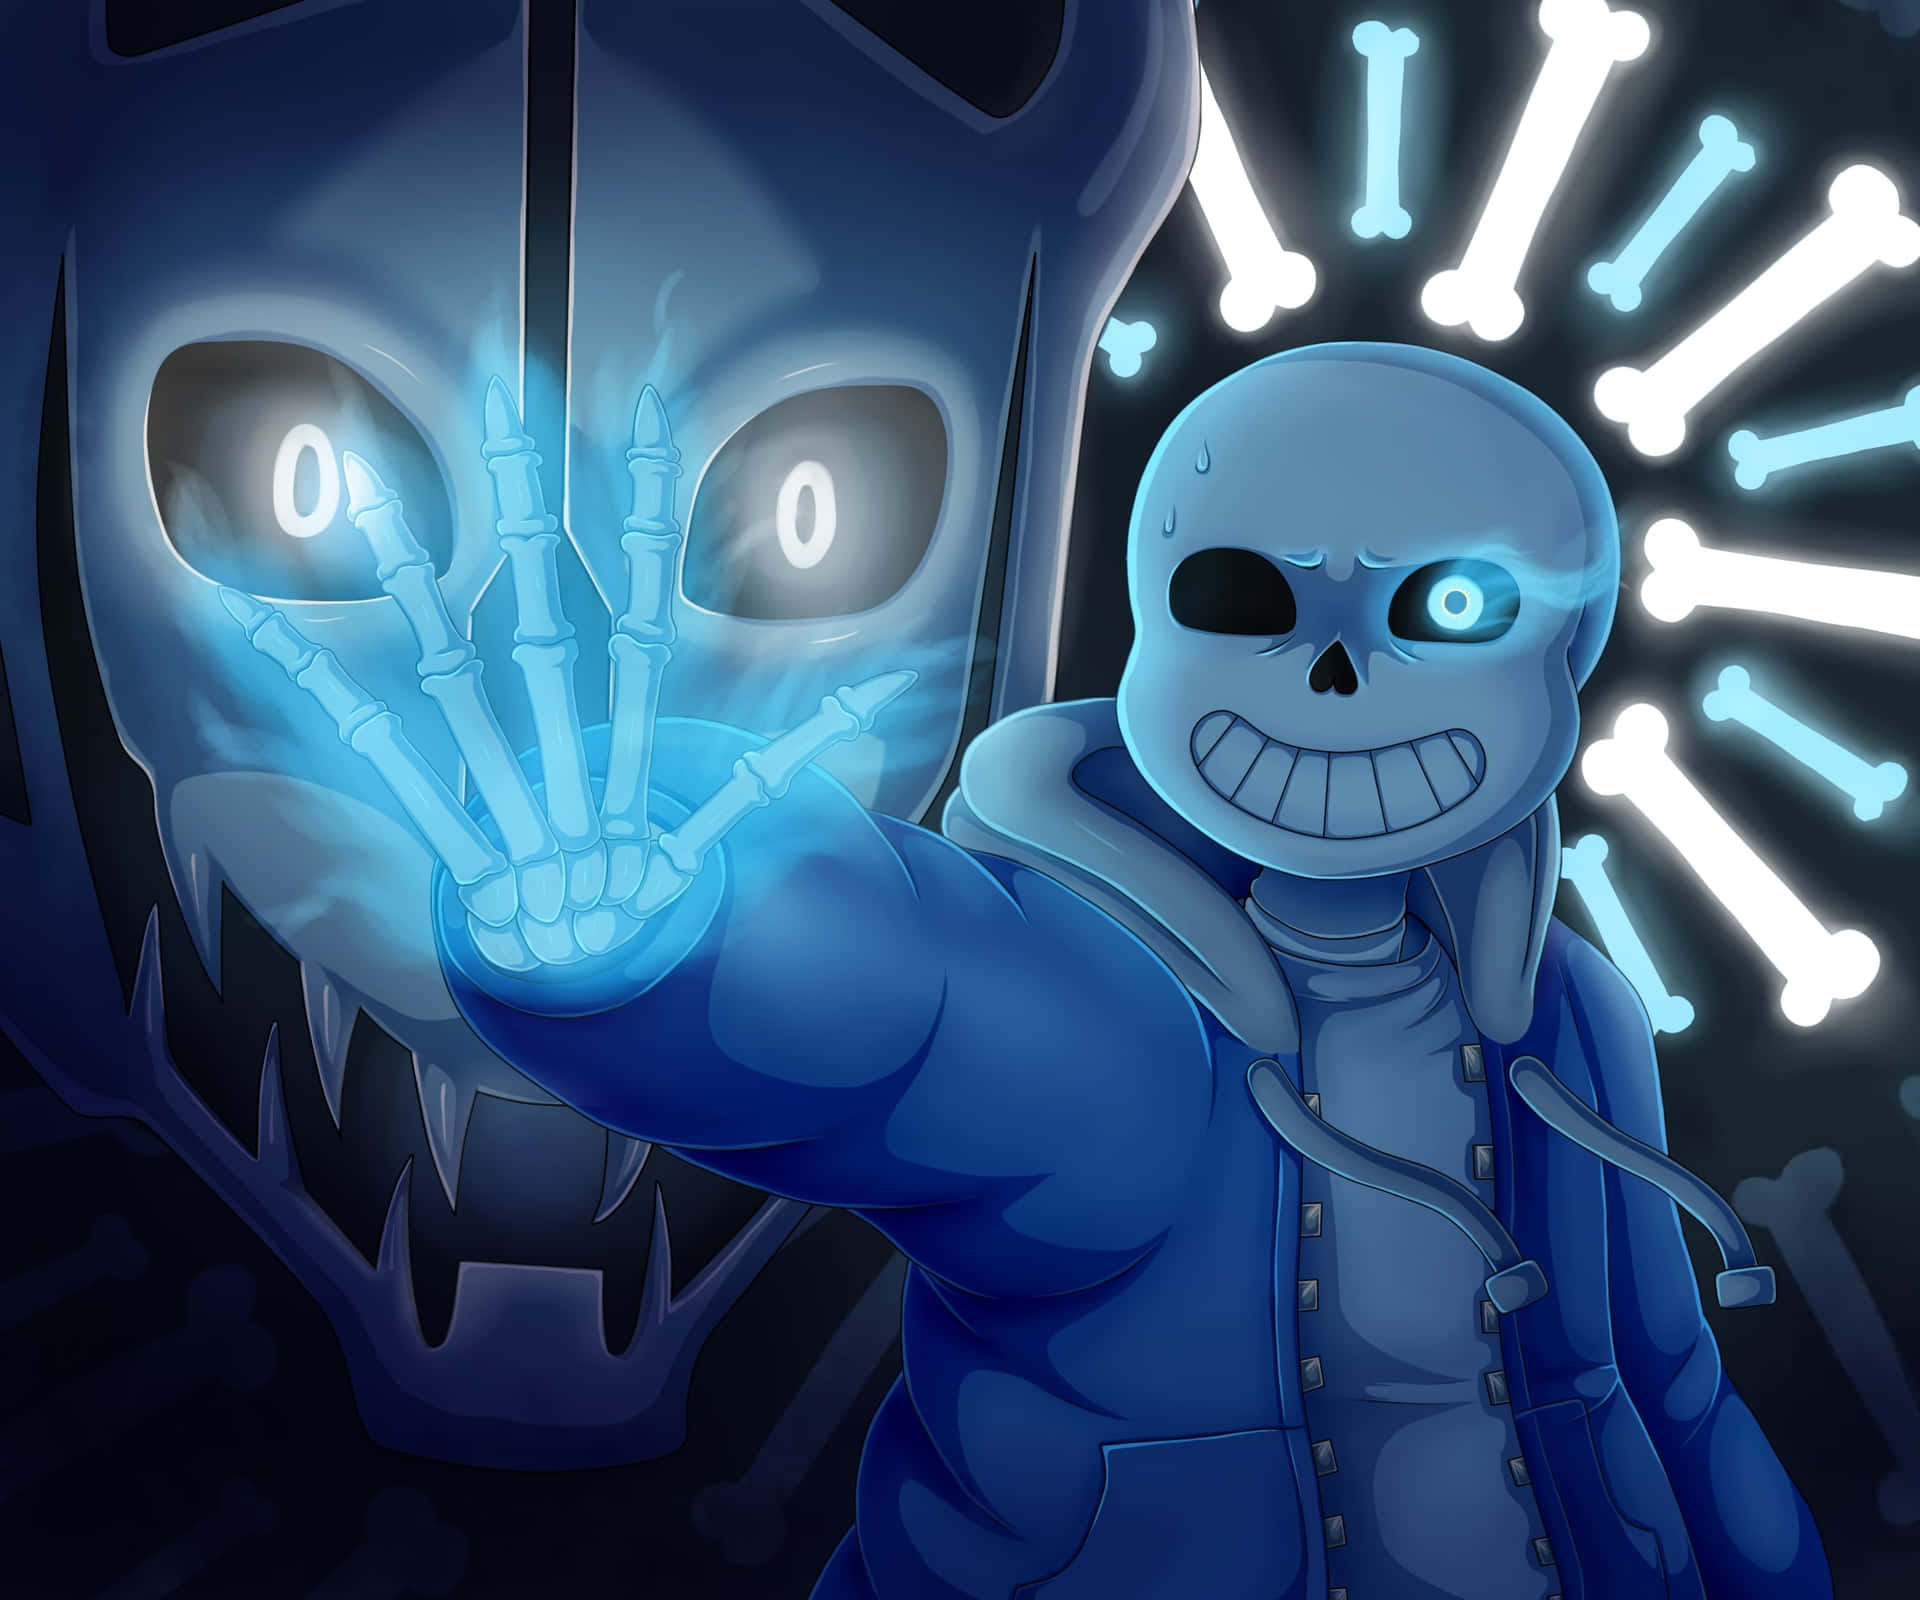 "Stay determined, even in the face of impossible odds." - Sans, Undertale Wallpaper